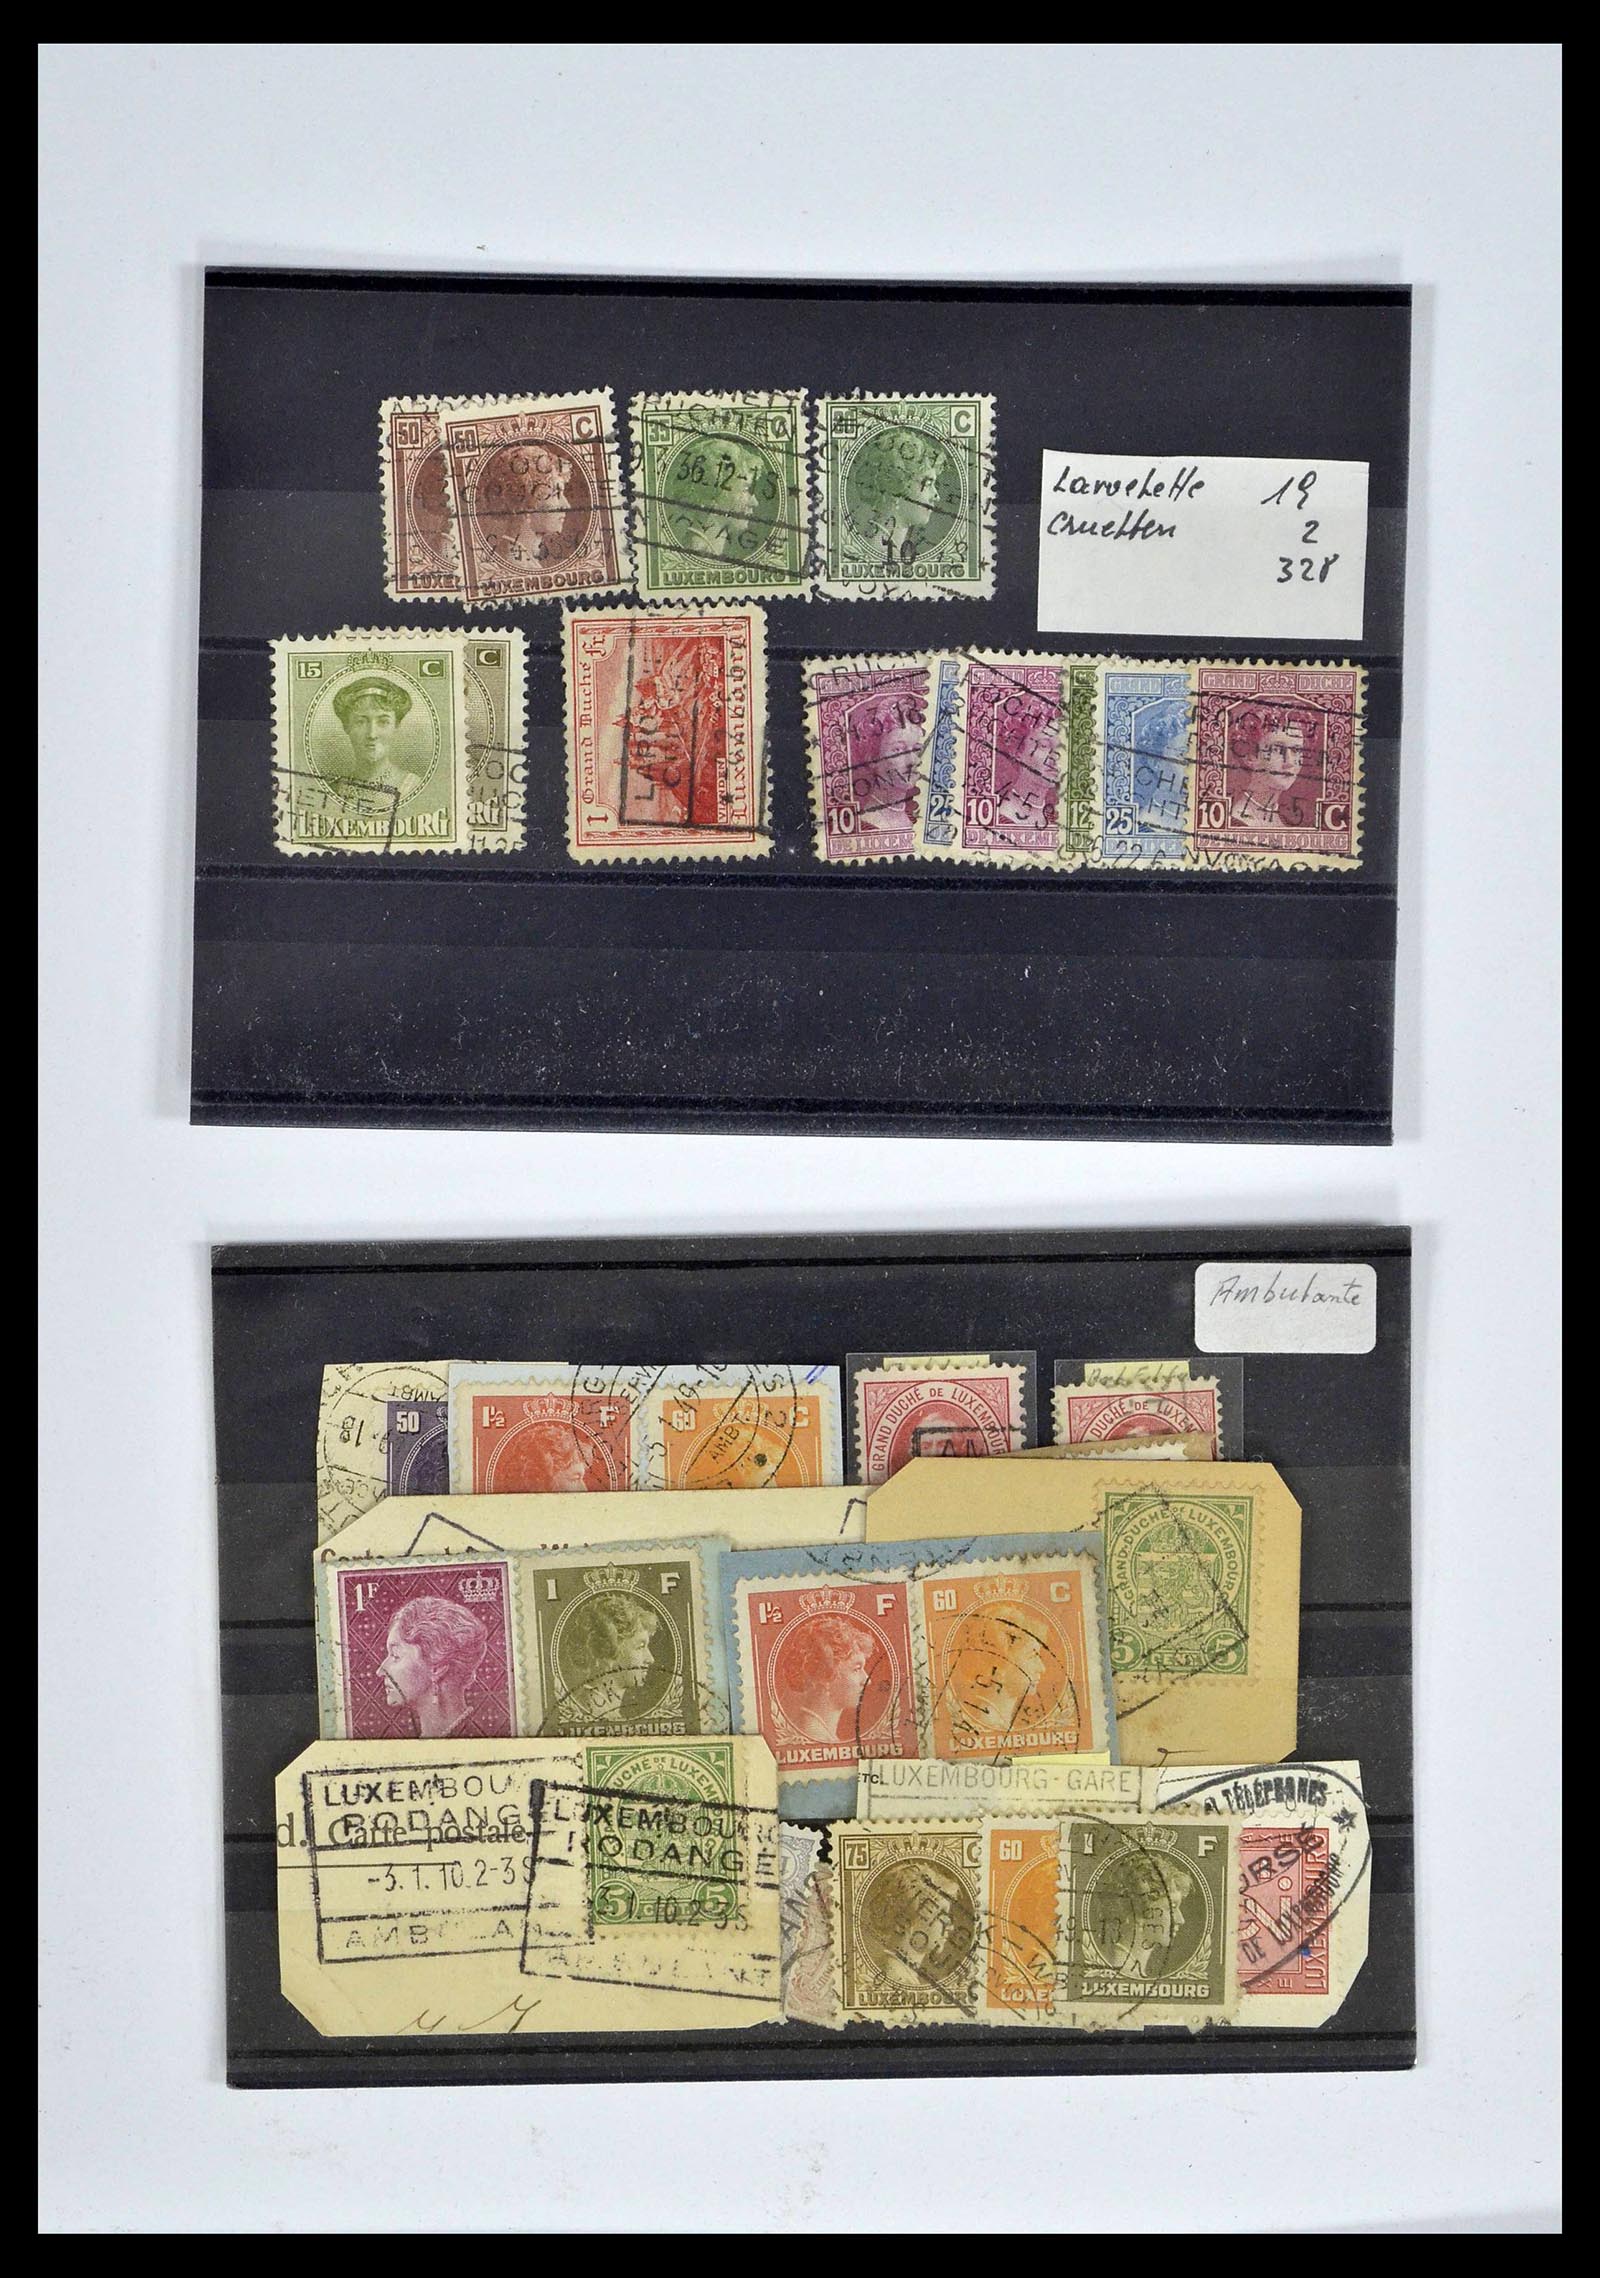 38876 0045 - Stamp collection 38876 Luxembourg train cancels 1890-1950.